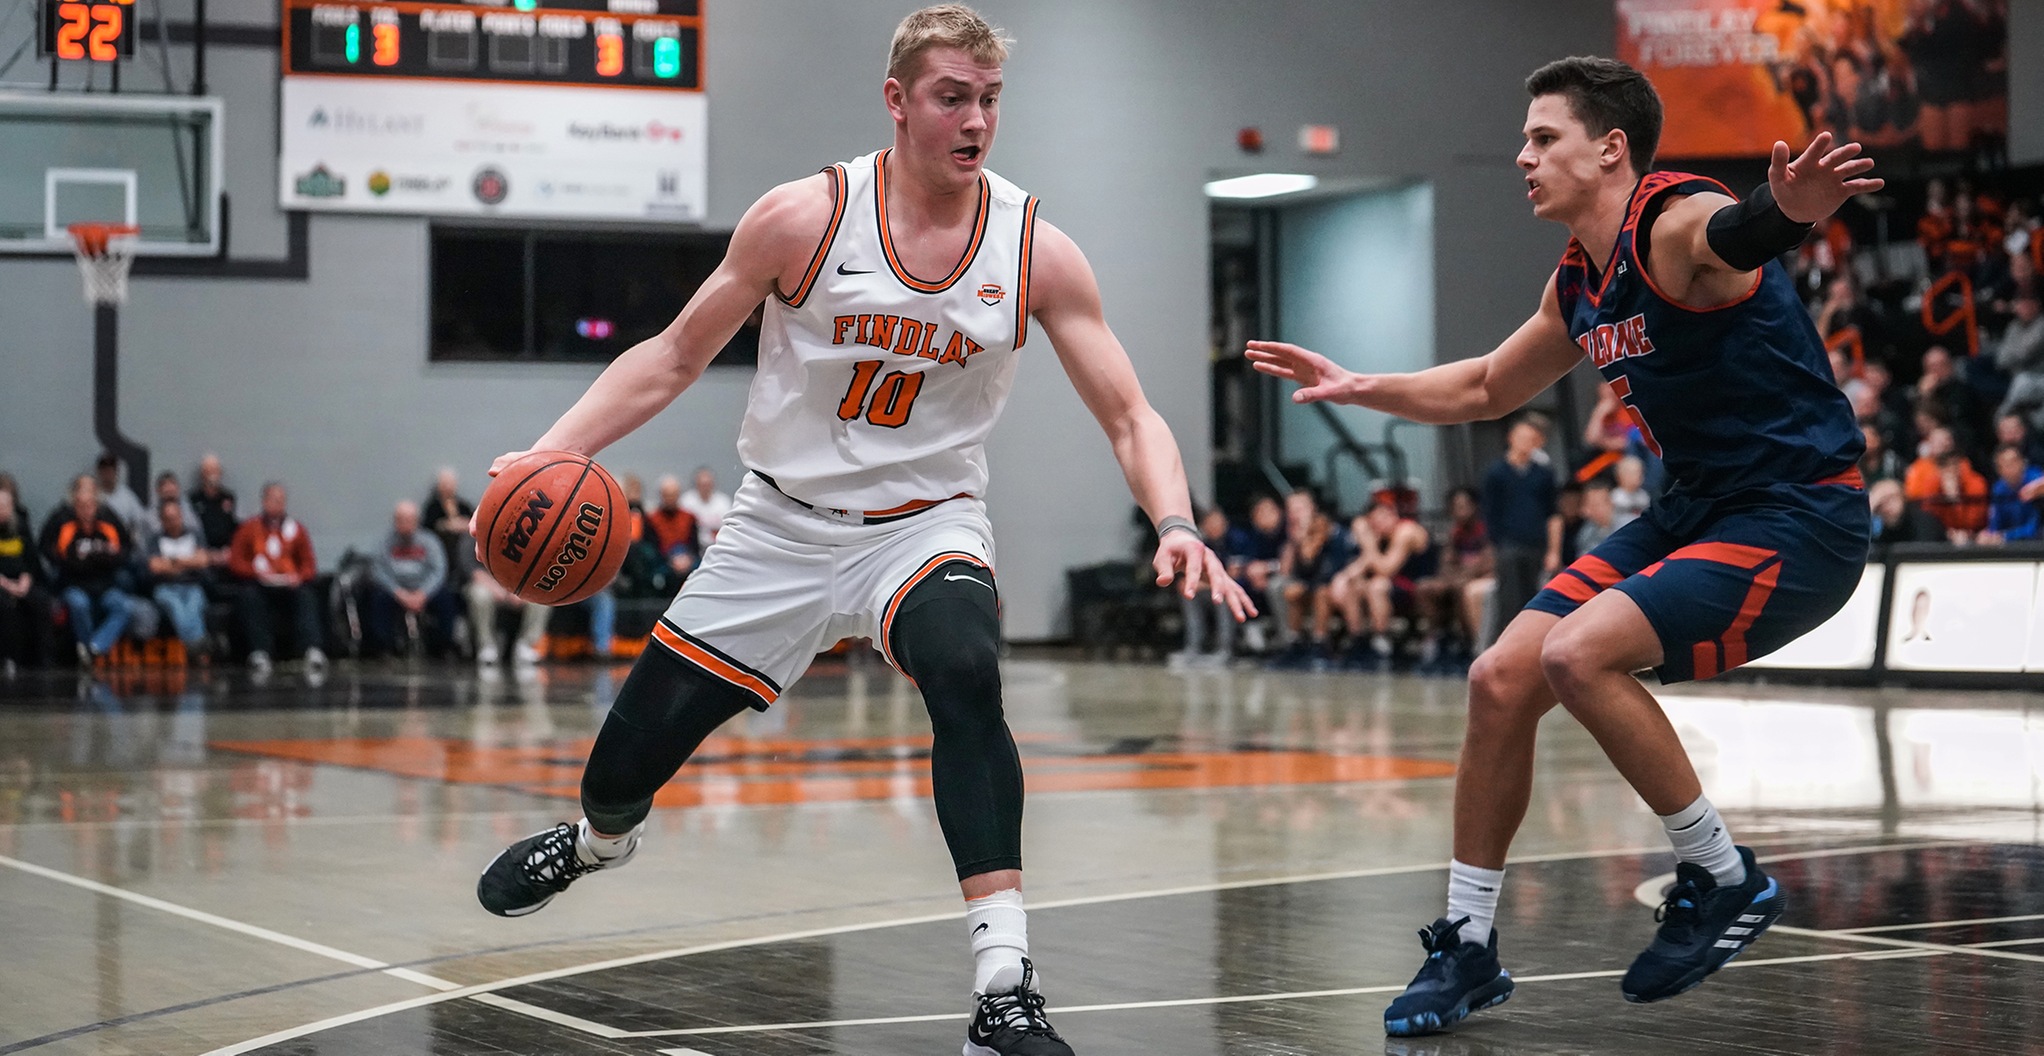 Oilers Hold on For 69-63 Win Over Malone